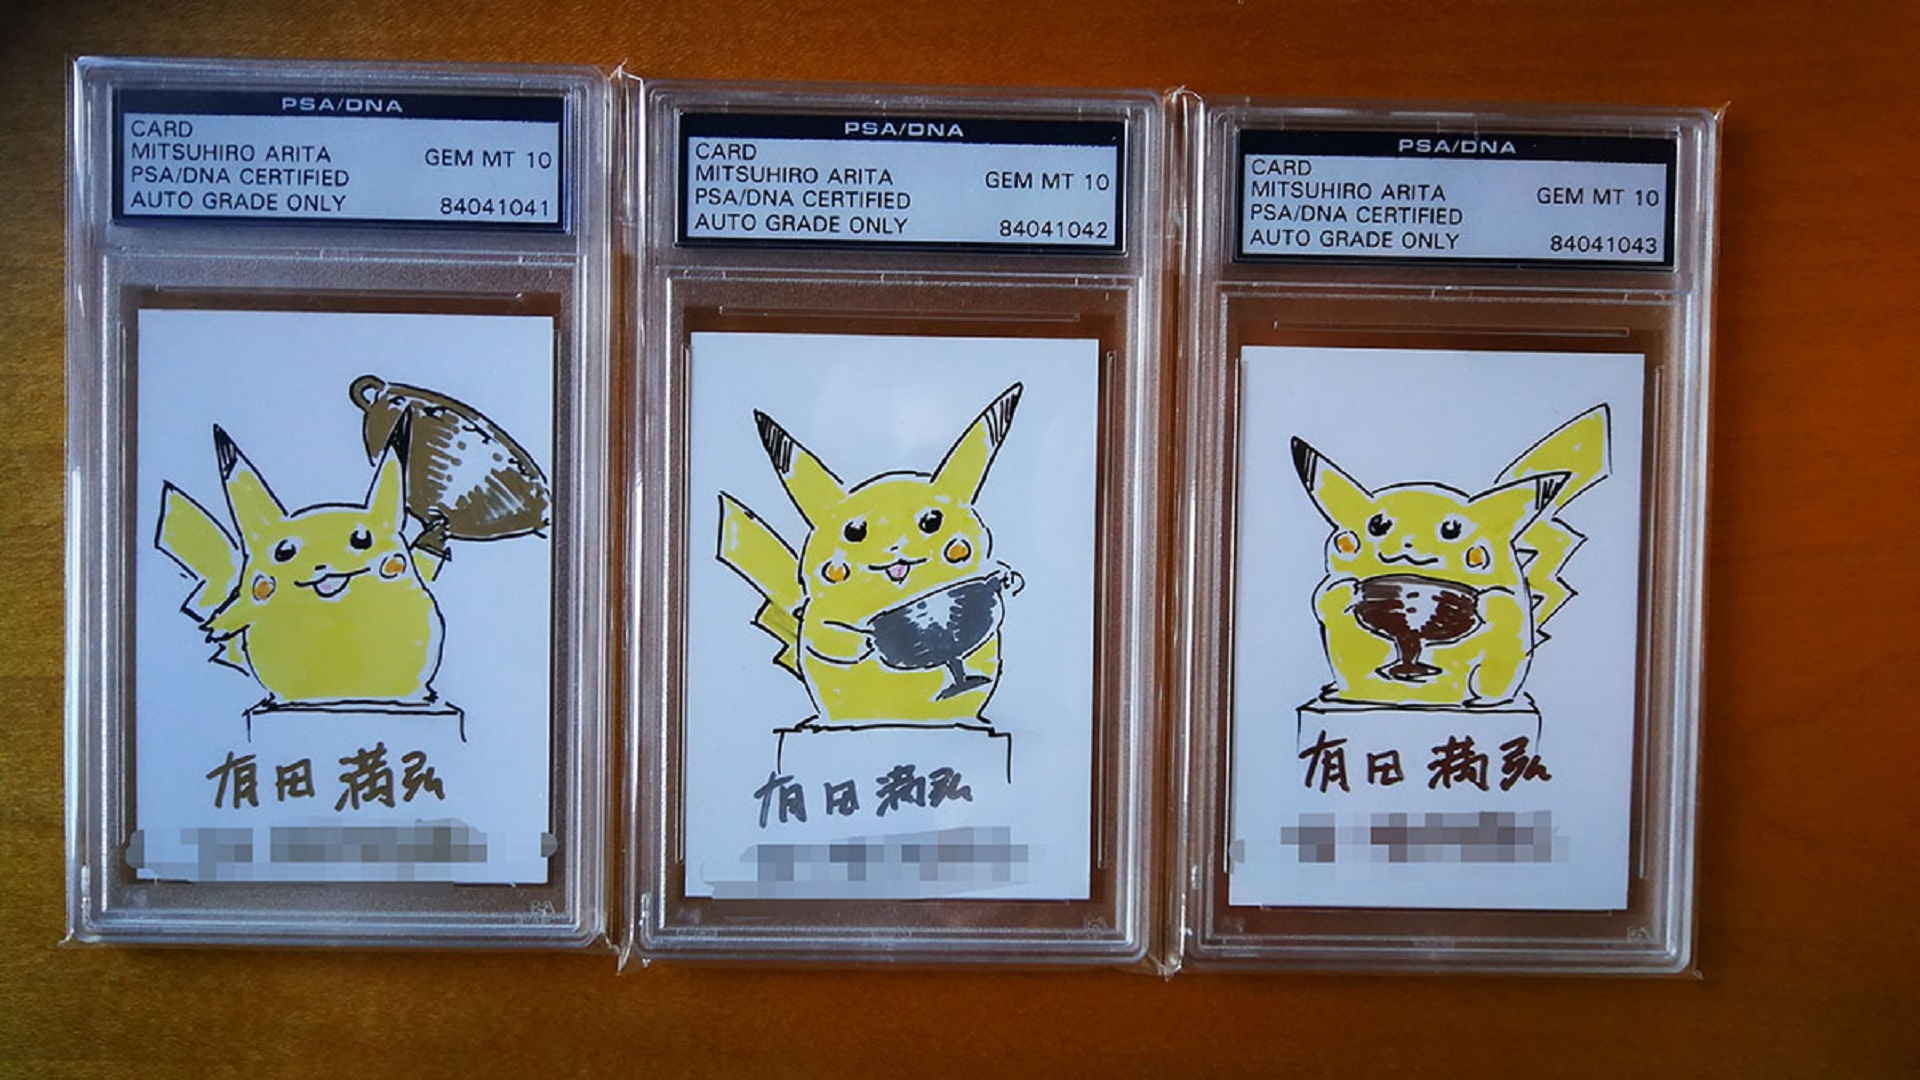 Pokemon Tcg Collector Swaps 900 000 Of Charizards For Pikachu Illustrator Card The Loadout